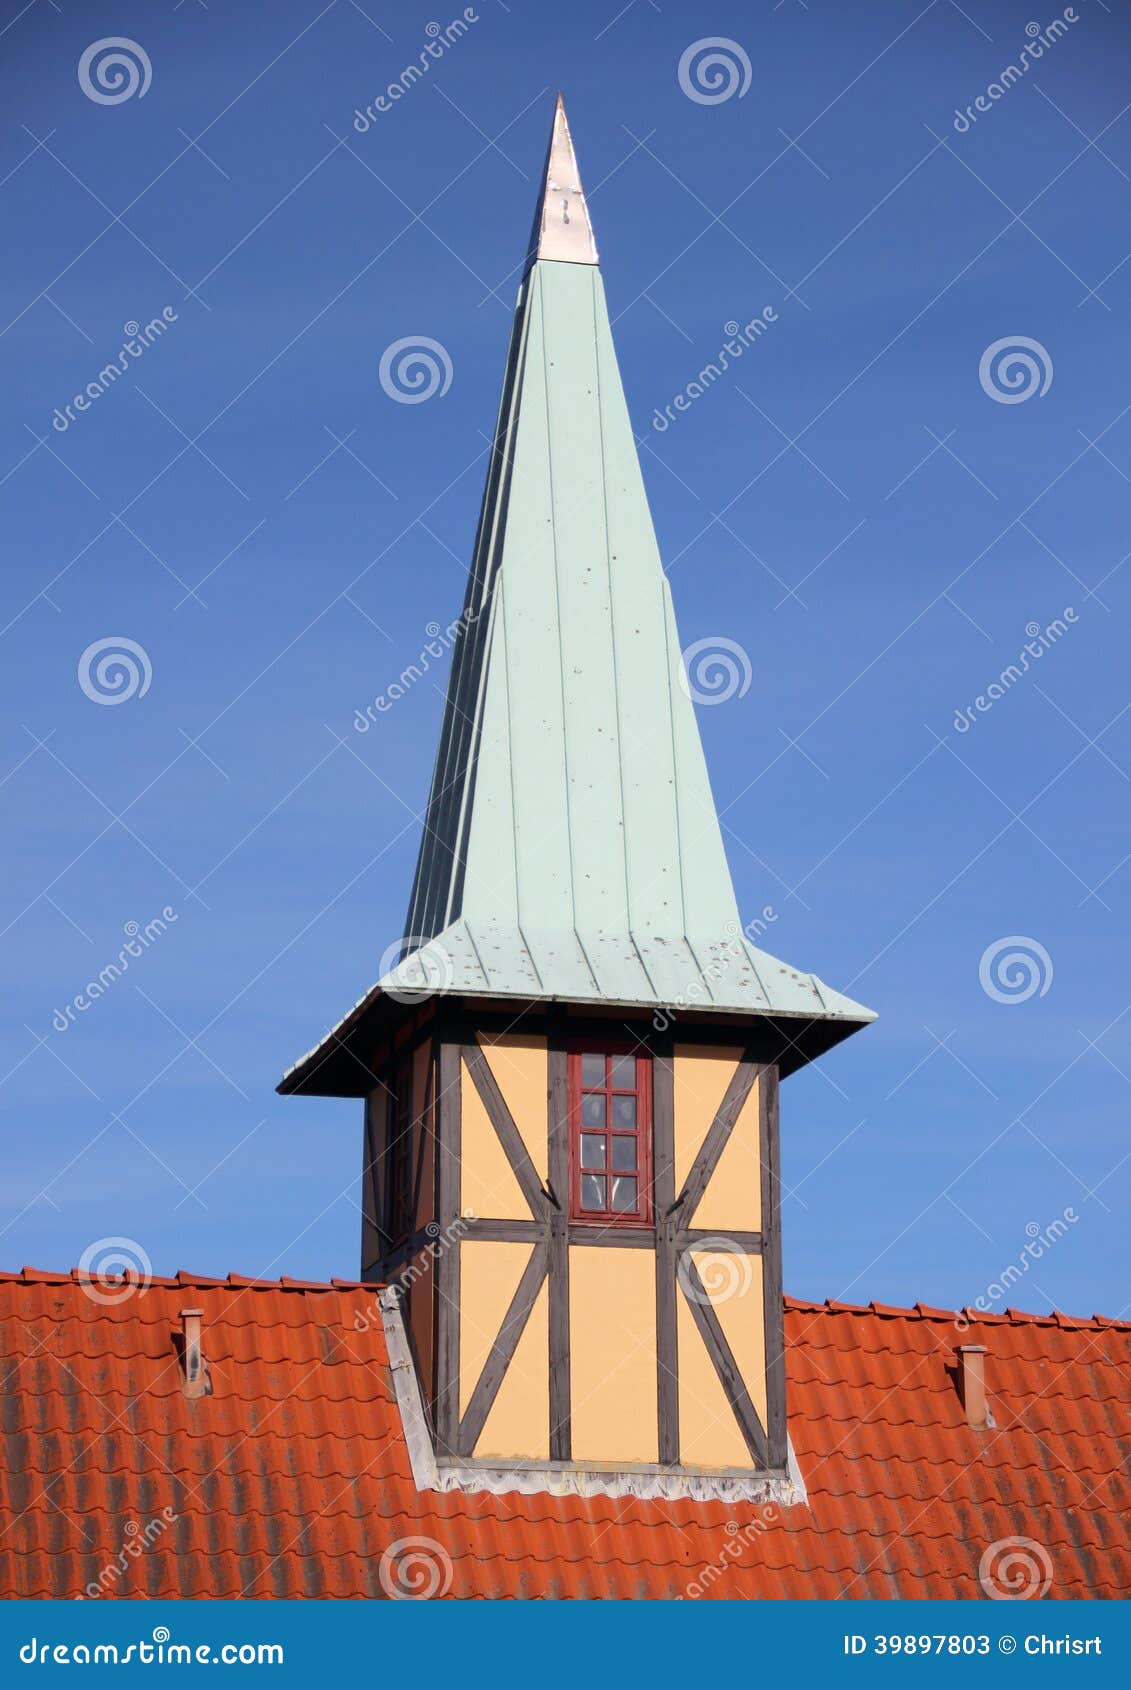 half-timbering tower with verdigris roof on red tile building